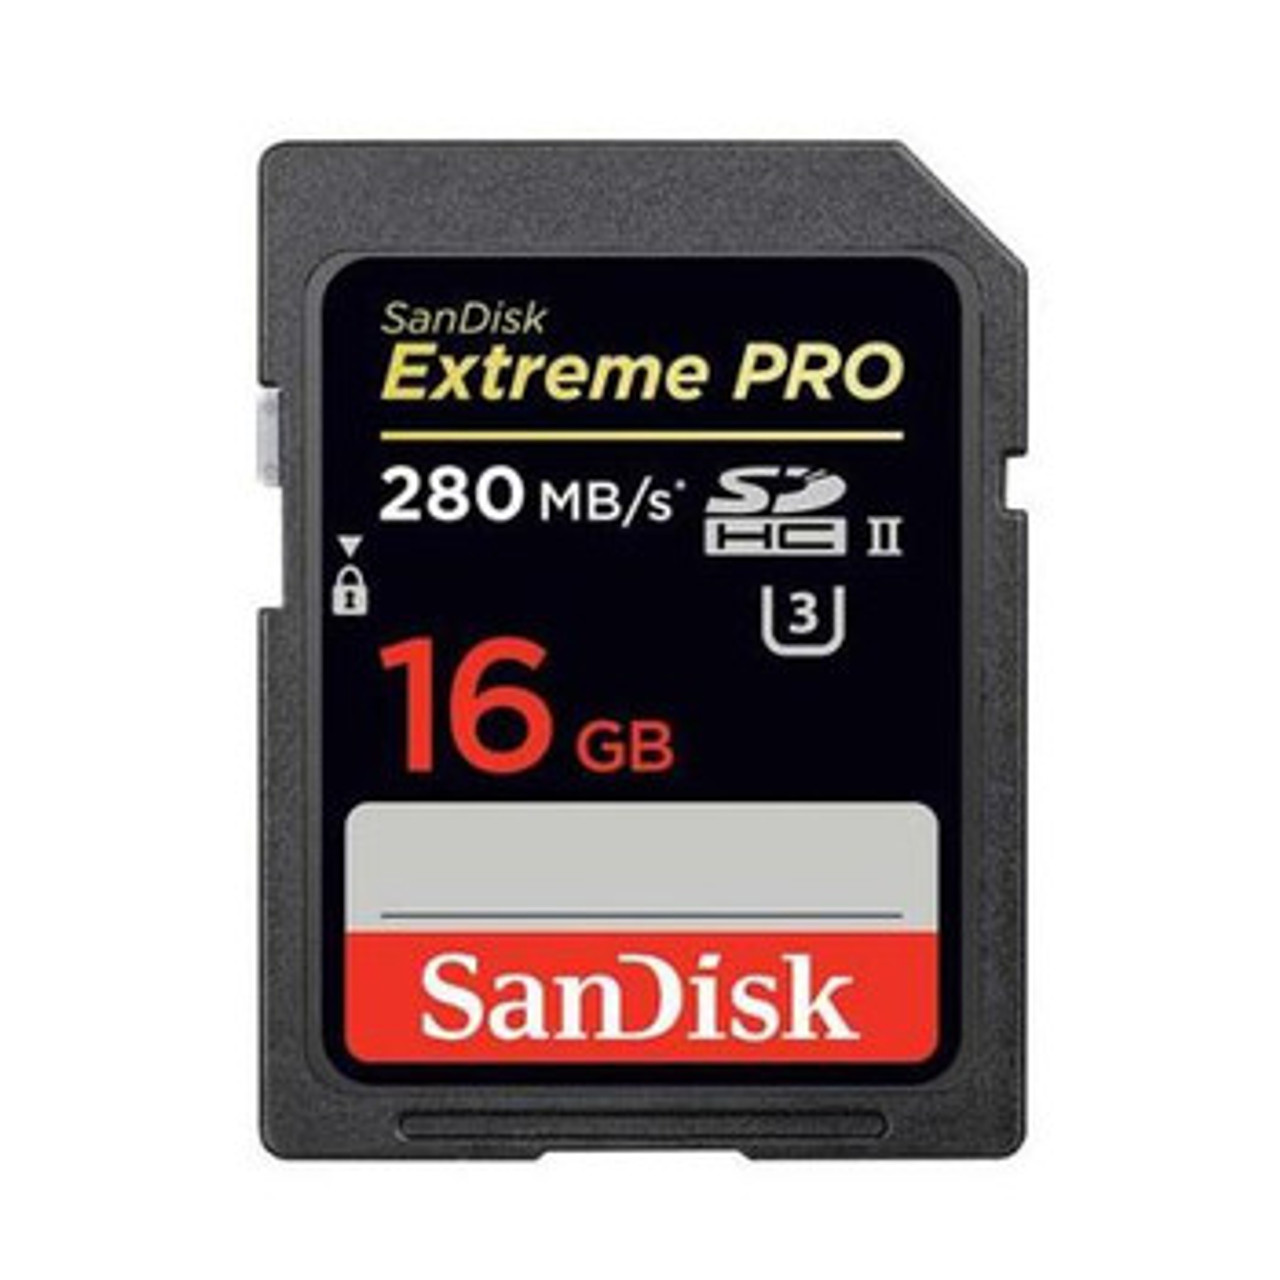 SDSDXPB-016G-A46 | Sandisk | Extreme Pro 16Gb Class 3 Sdhc Uhs-Ii Flash Memory Card